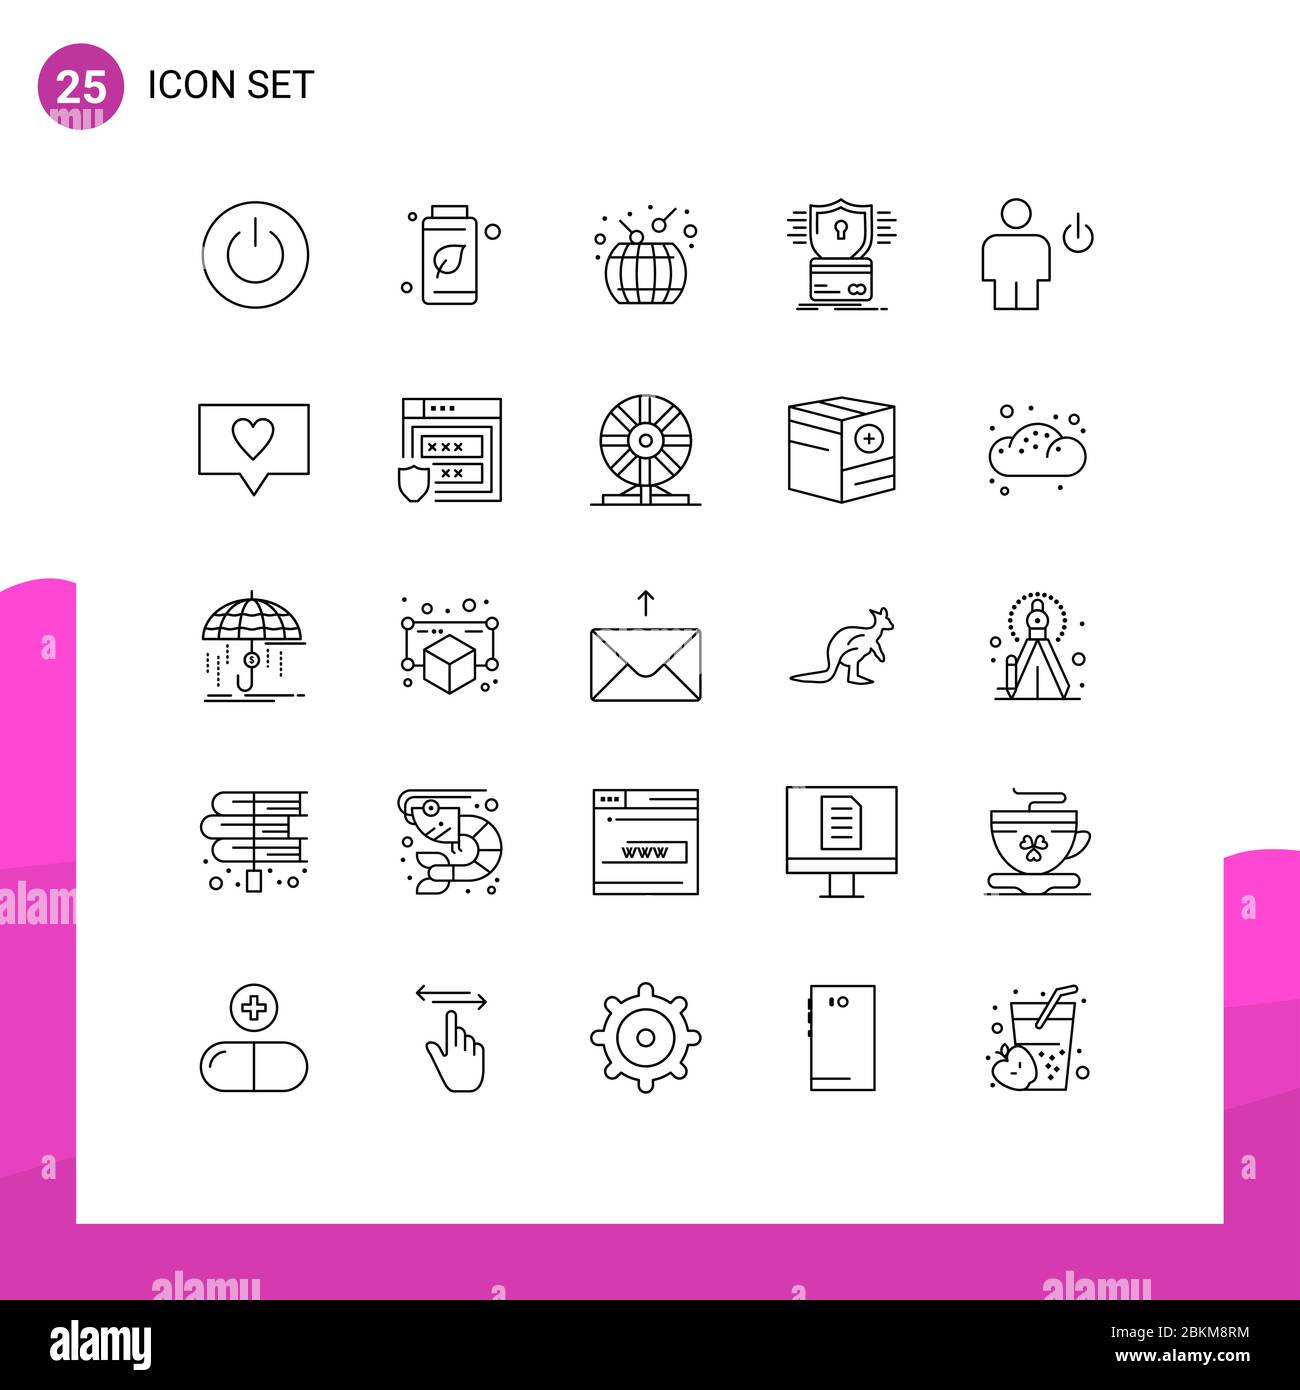 Mobile Interface Line Set of 25 Pictograms of hack, card, green, creditcard, drum Editable Vector Design Elements Stock Vector